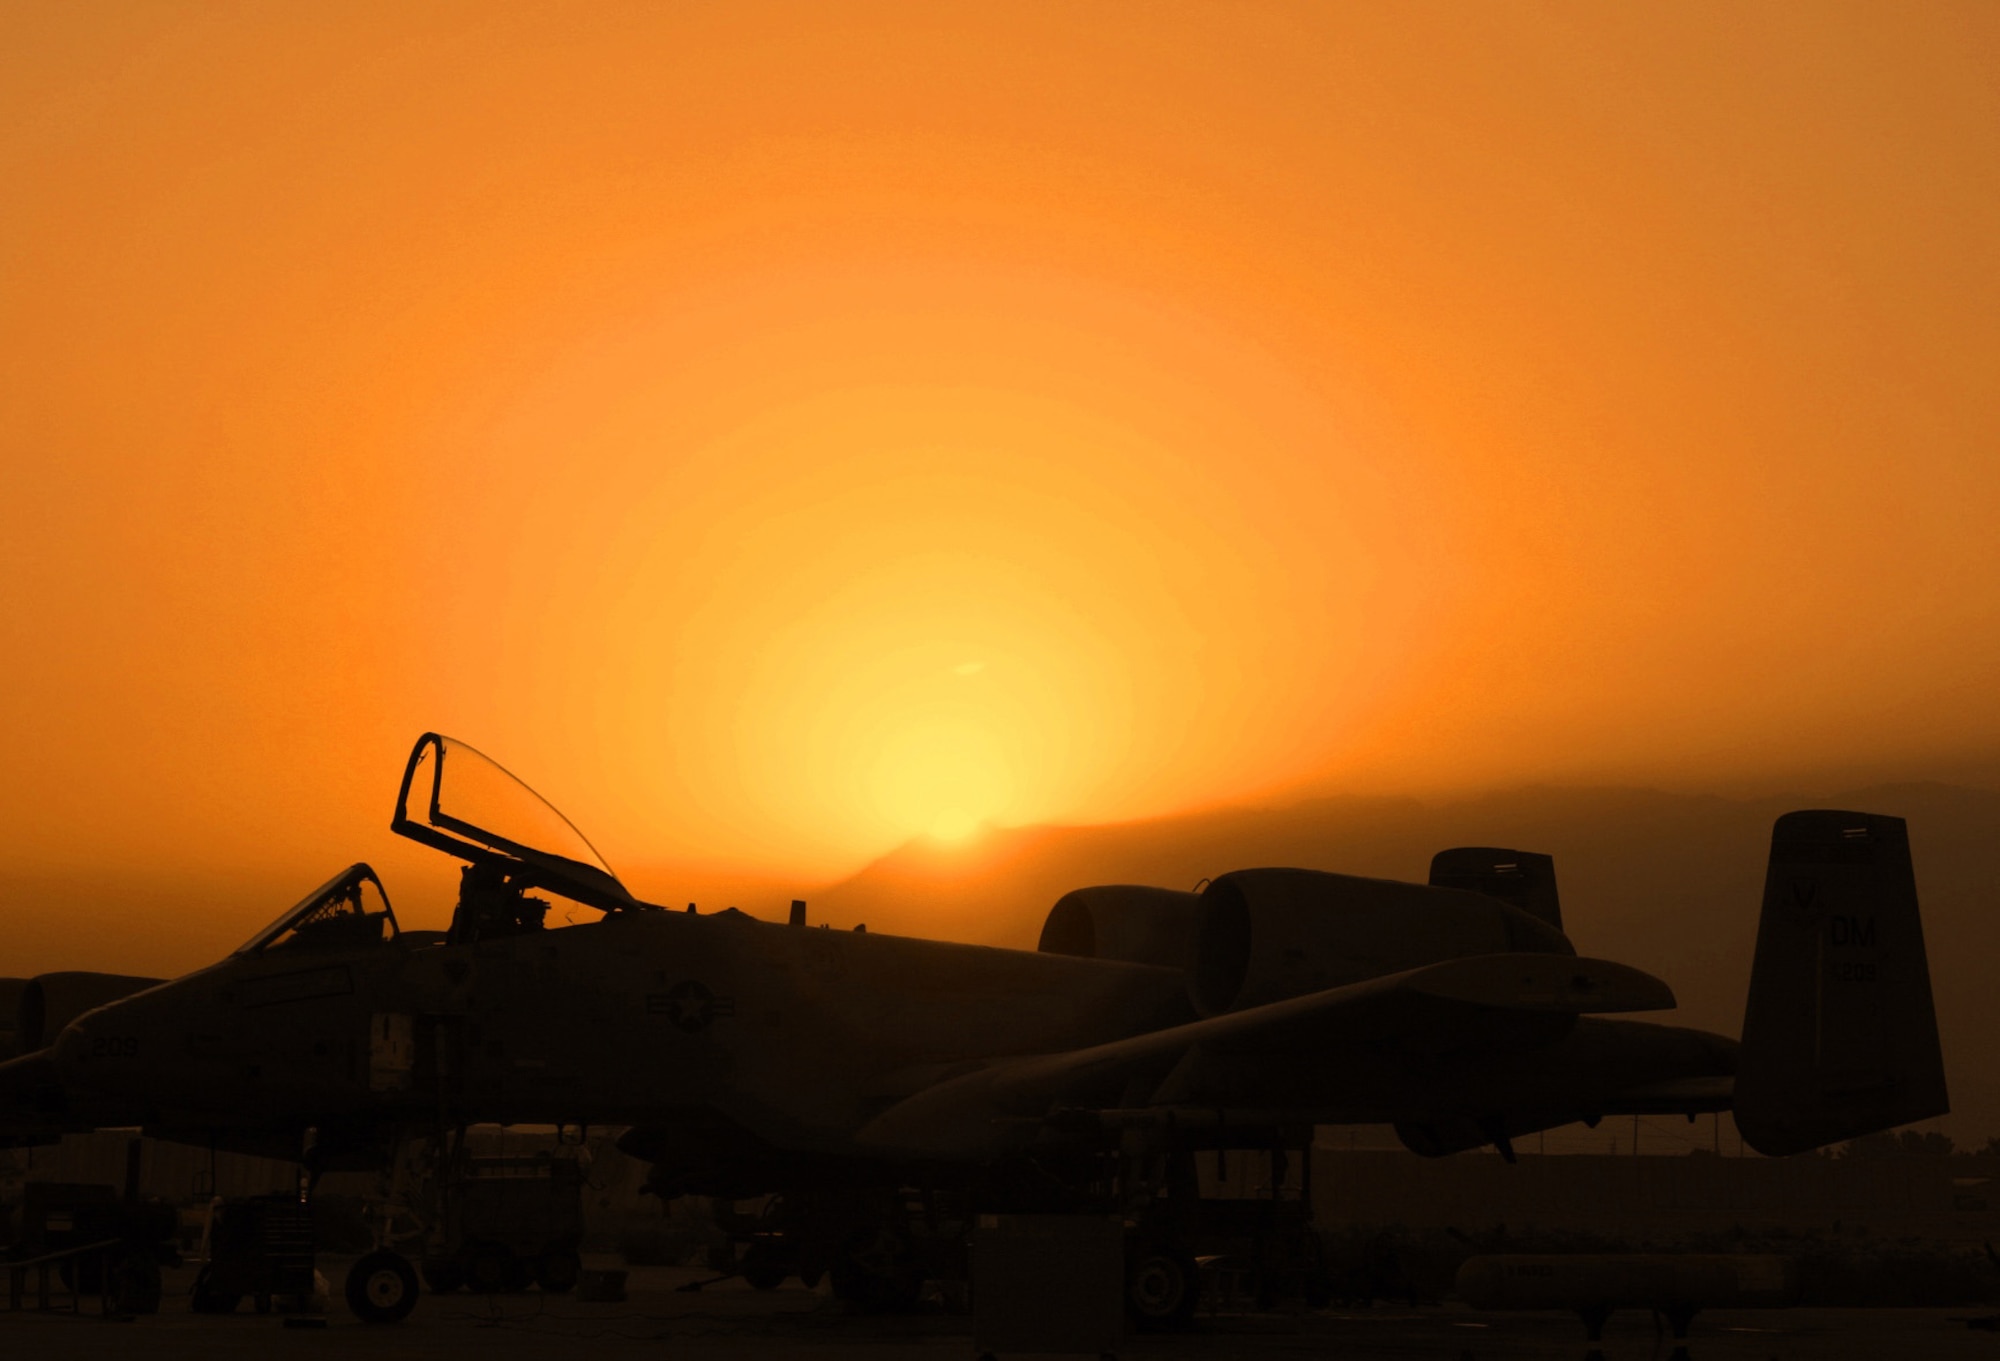 BAGRAM AIR BASE, Afghanistan (AFPN) -- The setting sun silhouettes an A-10 Thunderbolt II after a combat mission. Since Sept. 15, A-10s here have flown more than 1,700 combat sorties, totaling more than 6,000 combat hours in support of Operation Enduring Freedom. The A-10 was the first Air Force aircraft specially designed for close-air support of ground forces. (U.S. Air Force photo by Chief Master Sgt. David L. Stuppy) 
